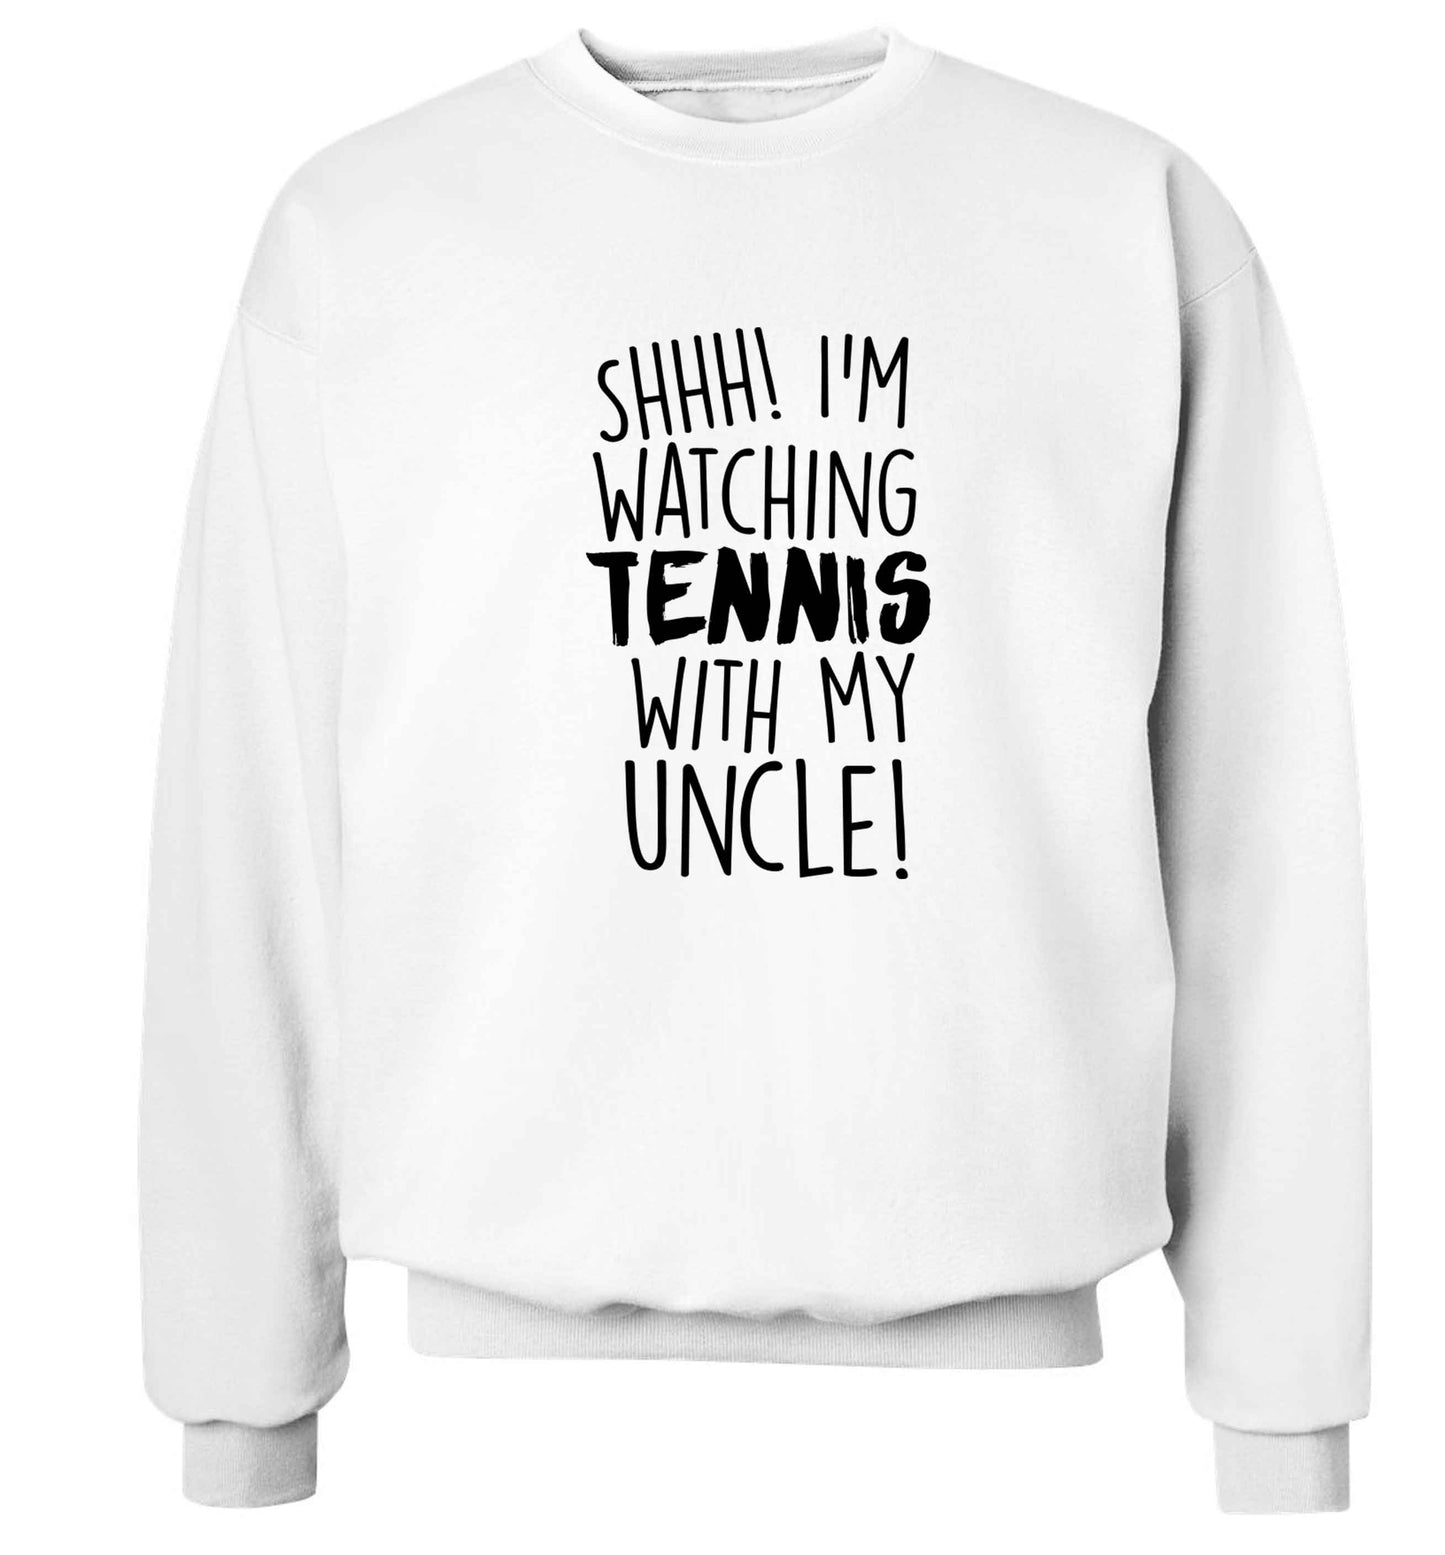 Shh! I'm watching tennis with my uncle! Adult's unisex white Sweater 2XL